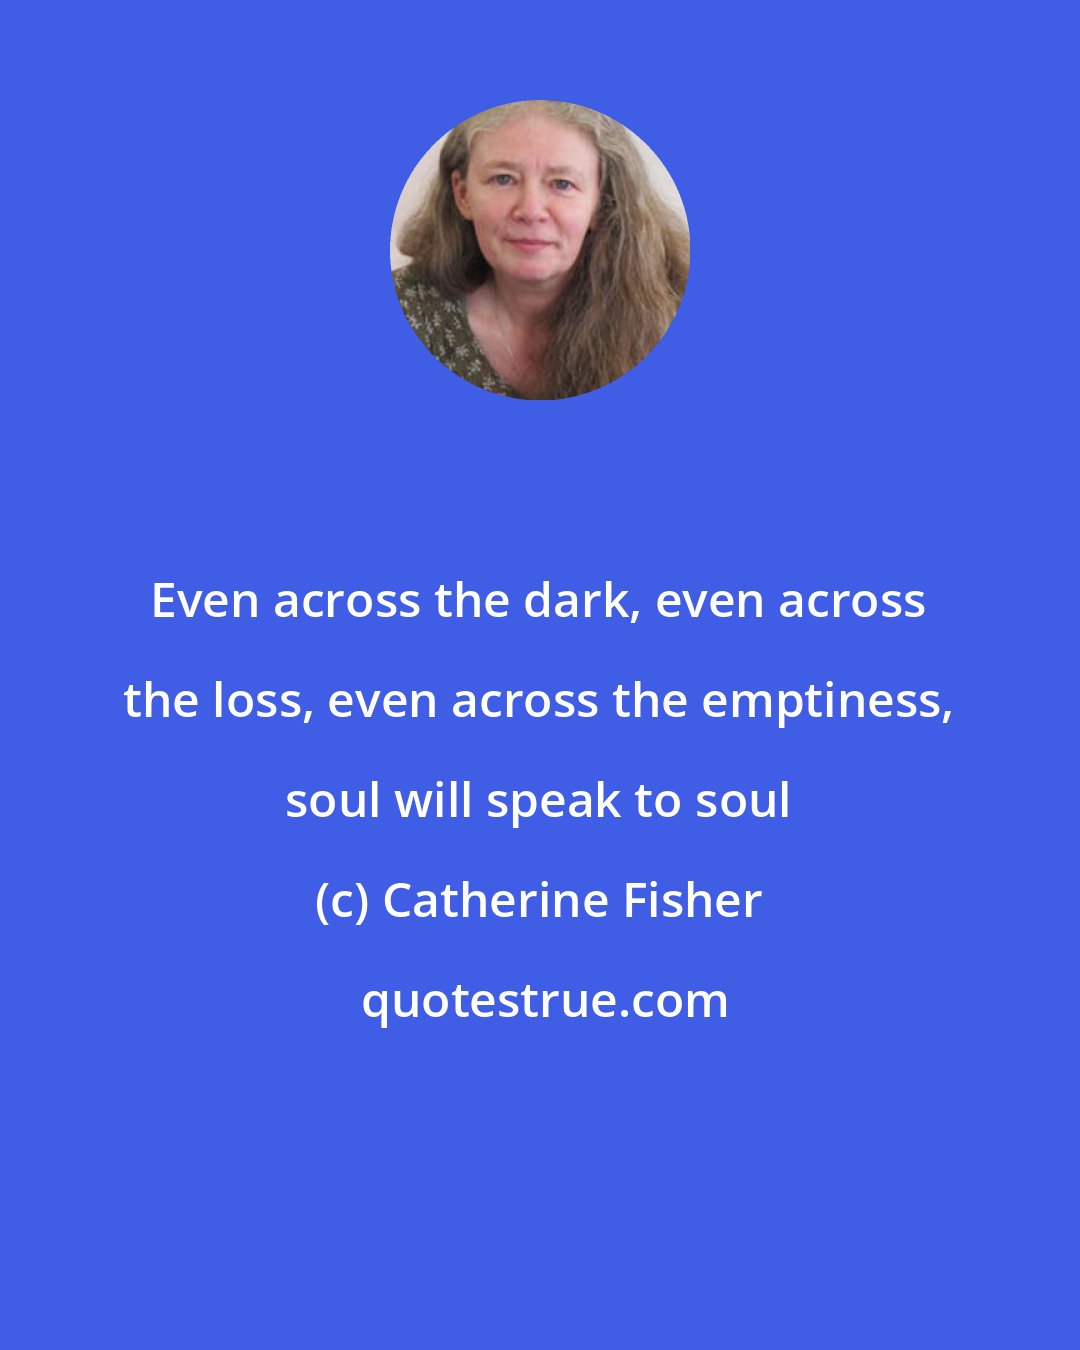 Catherine Fisher: Even across the dark, even across the loss, even across the emptiness, soul will speak to soul